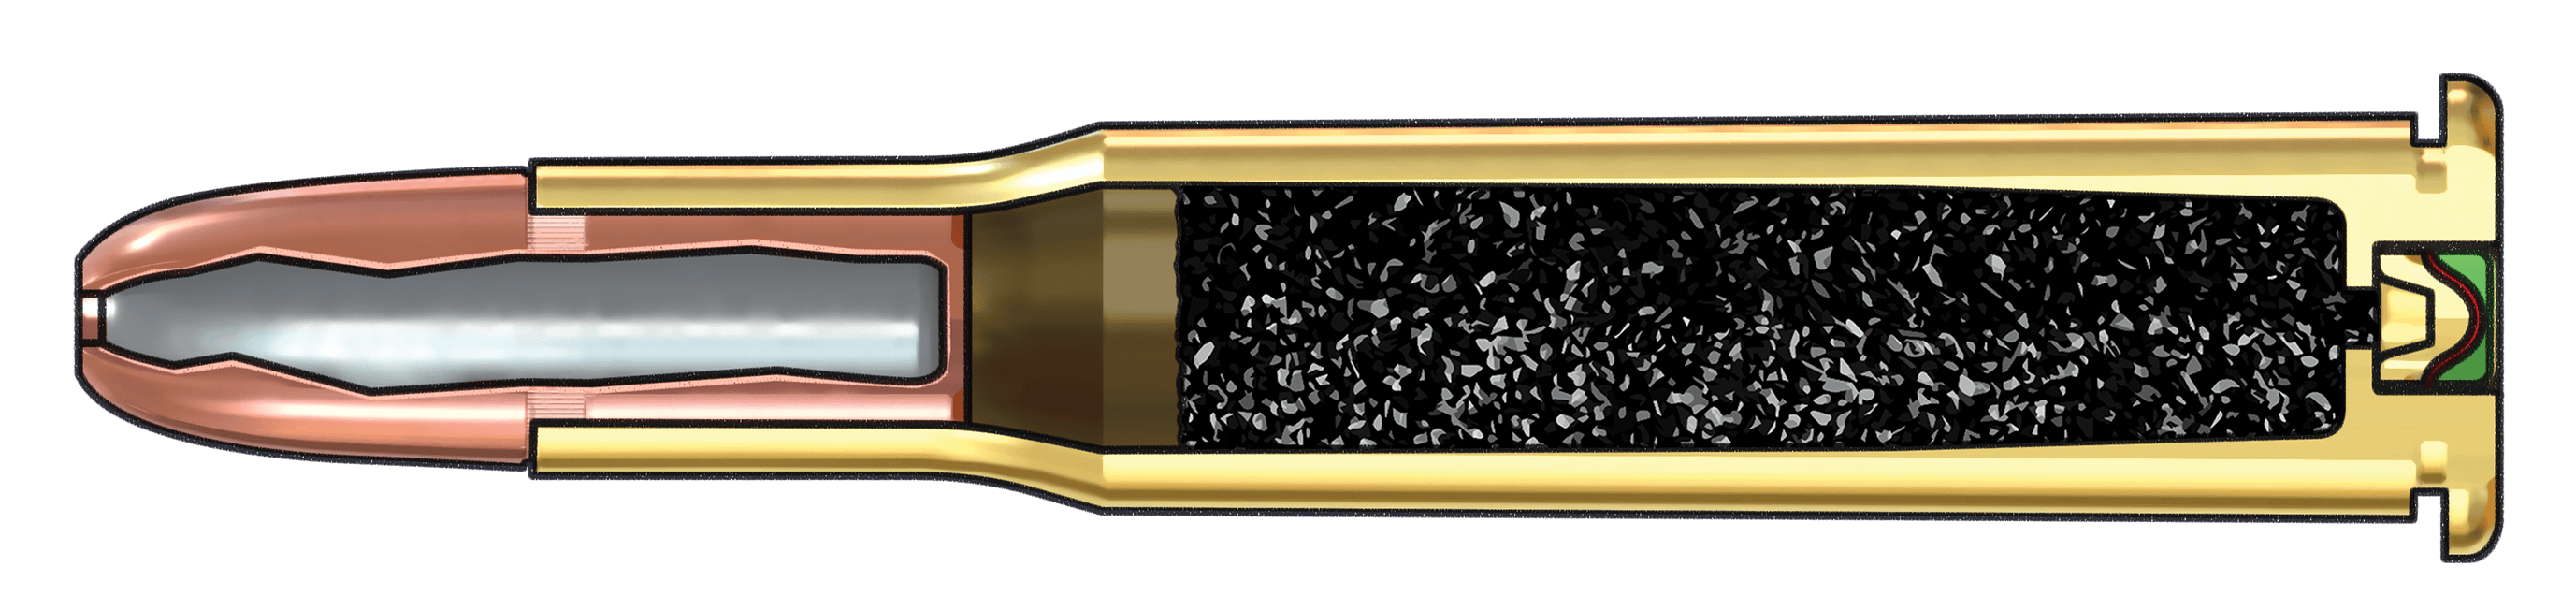 30-30 Winchester, 150 Grain Features